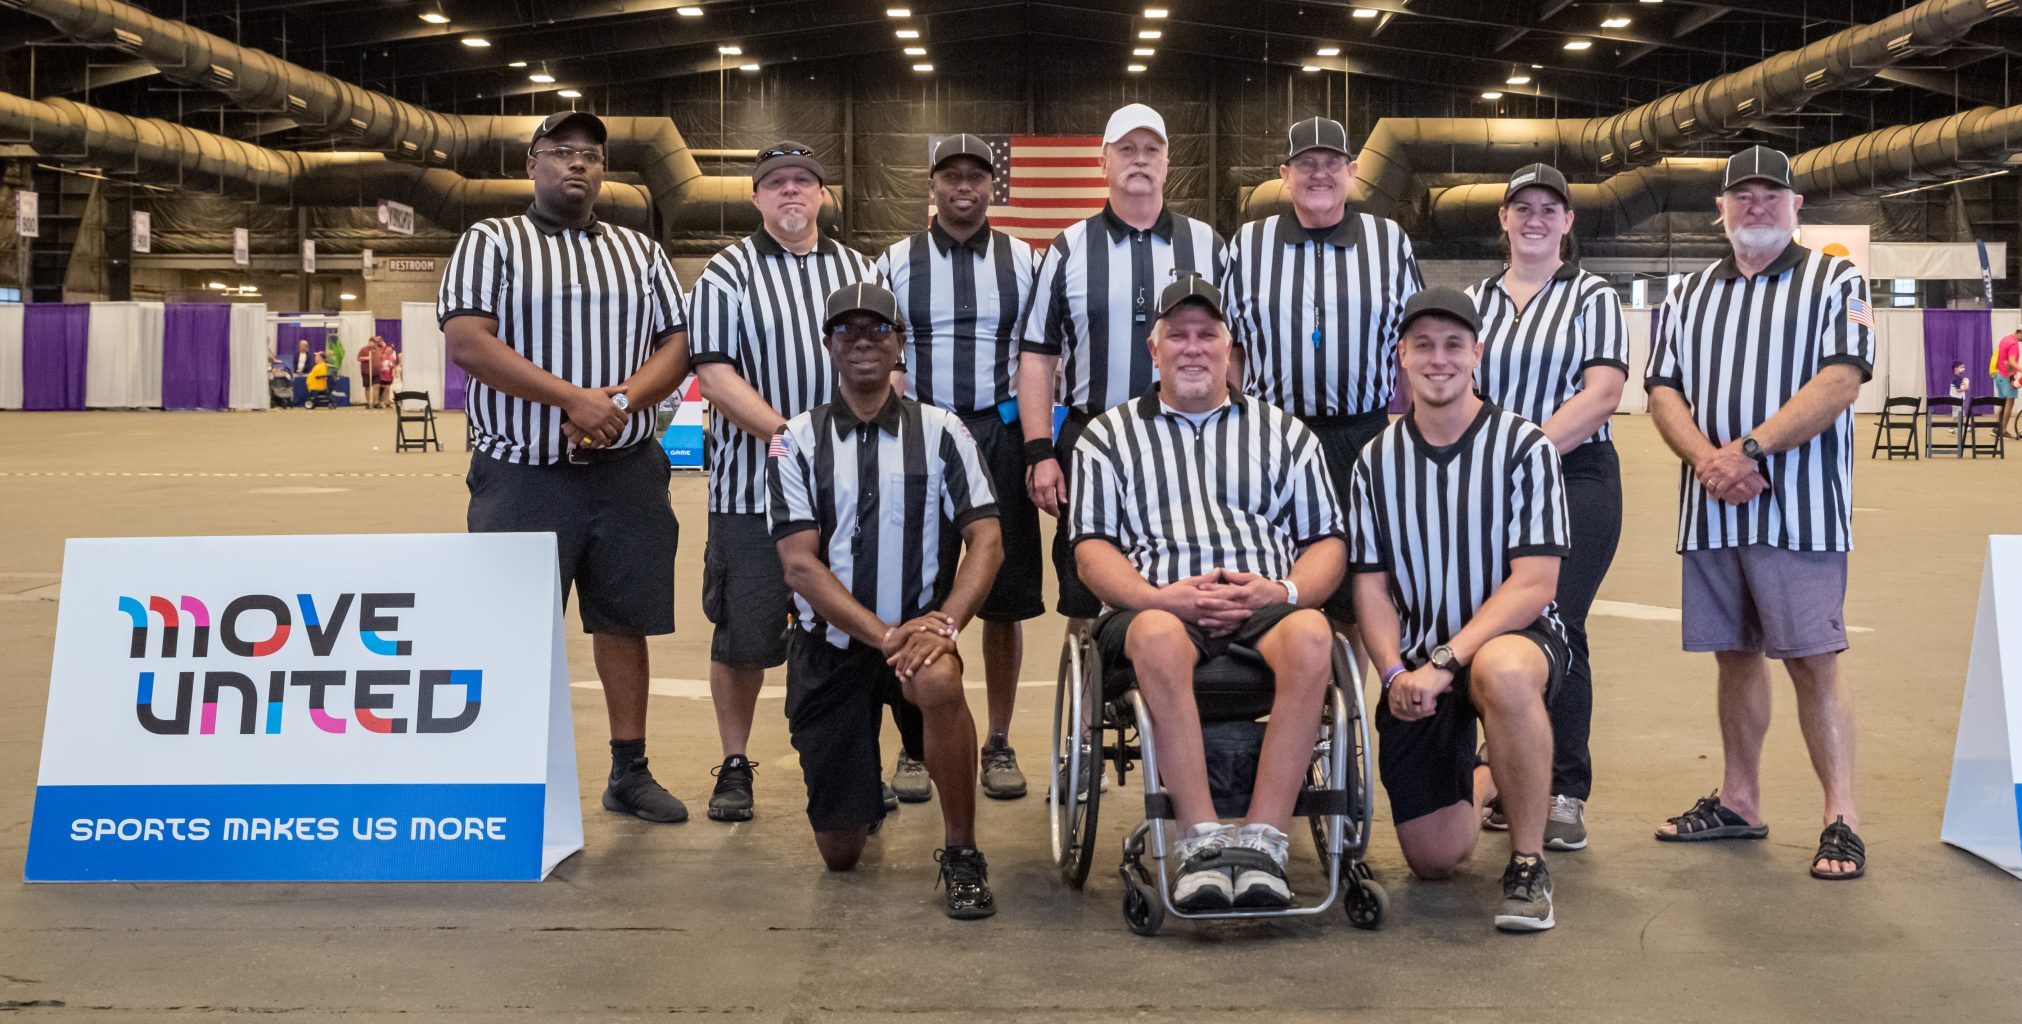 Referees from the USAWFL pose for a photo together